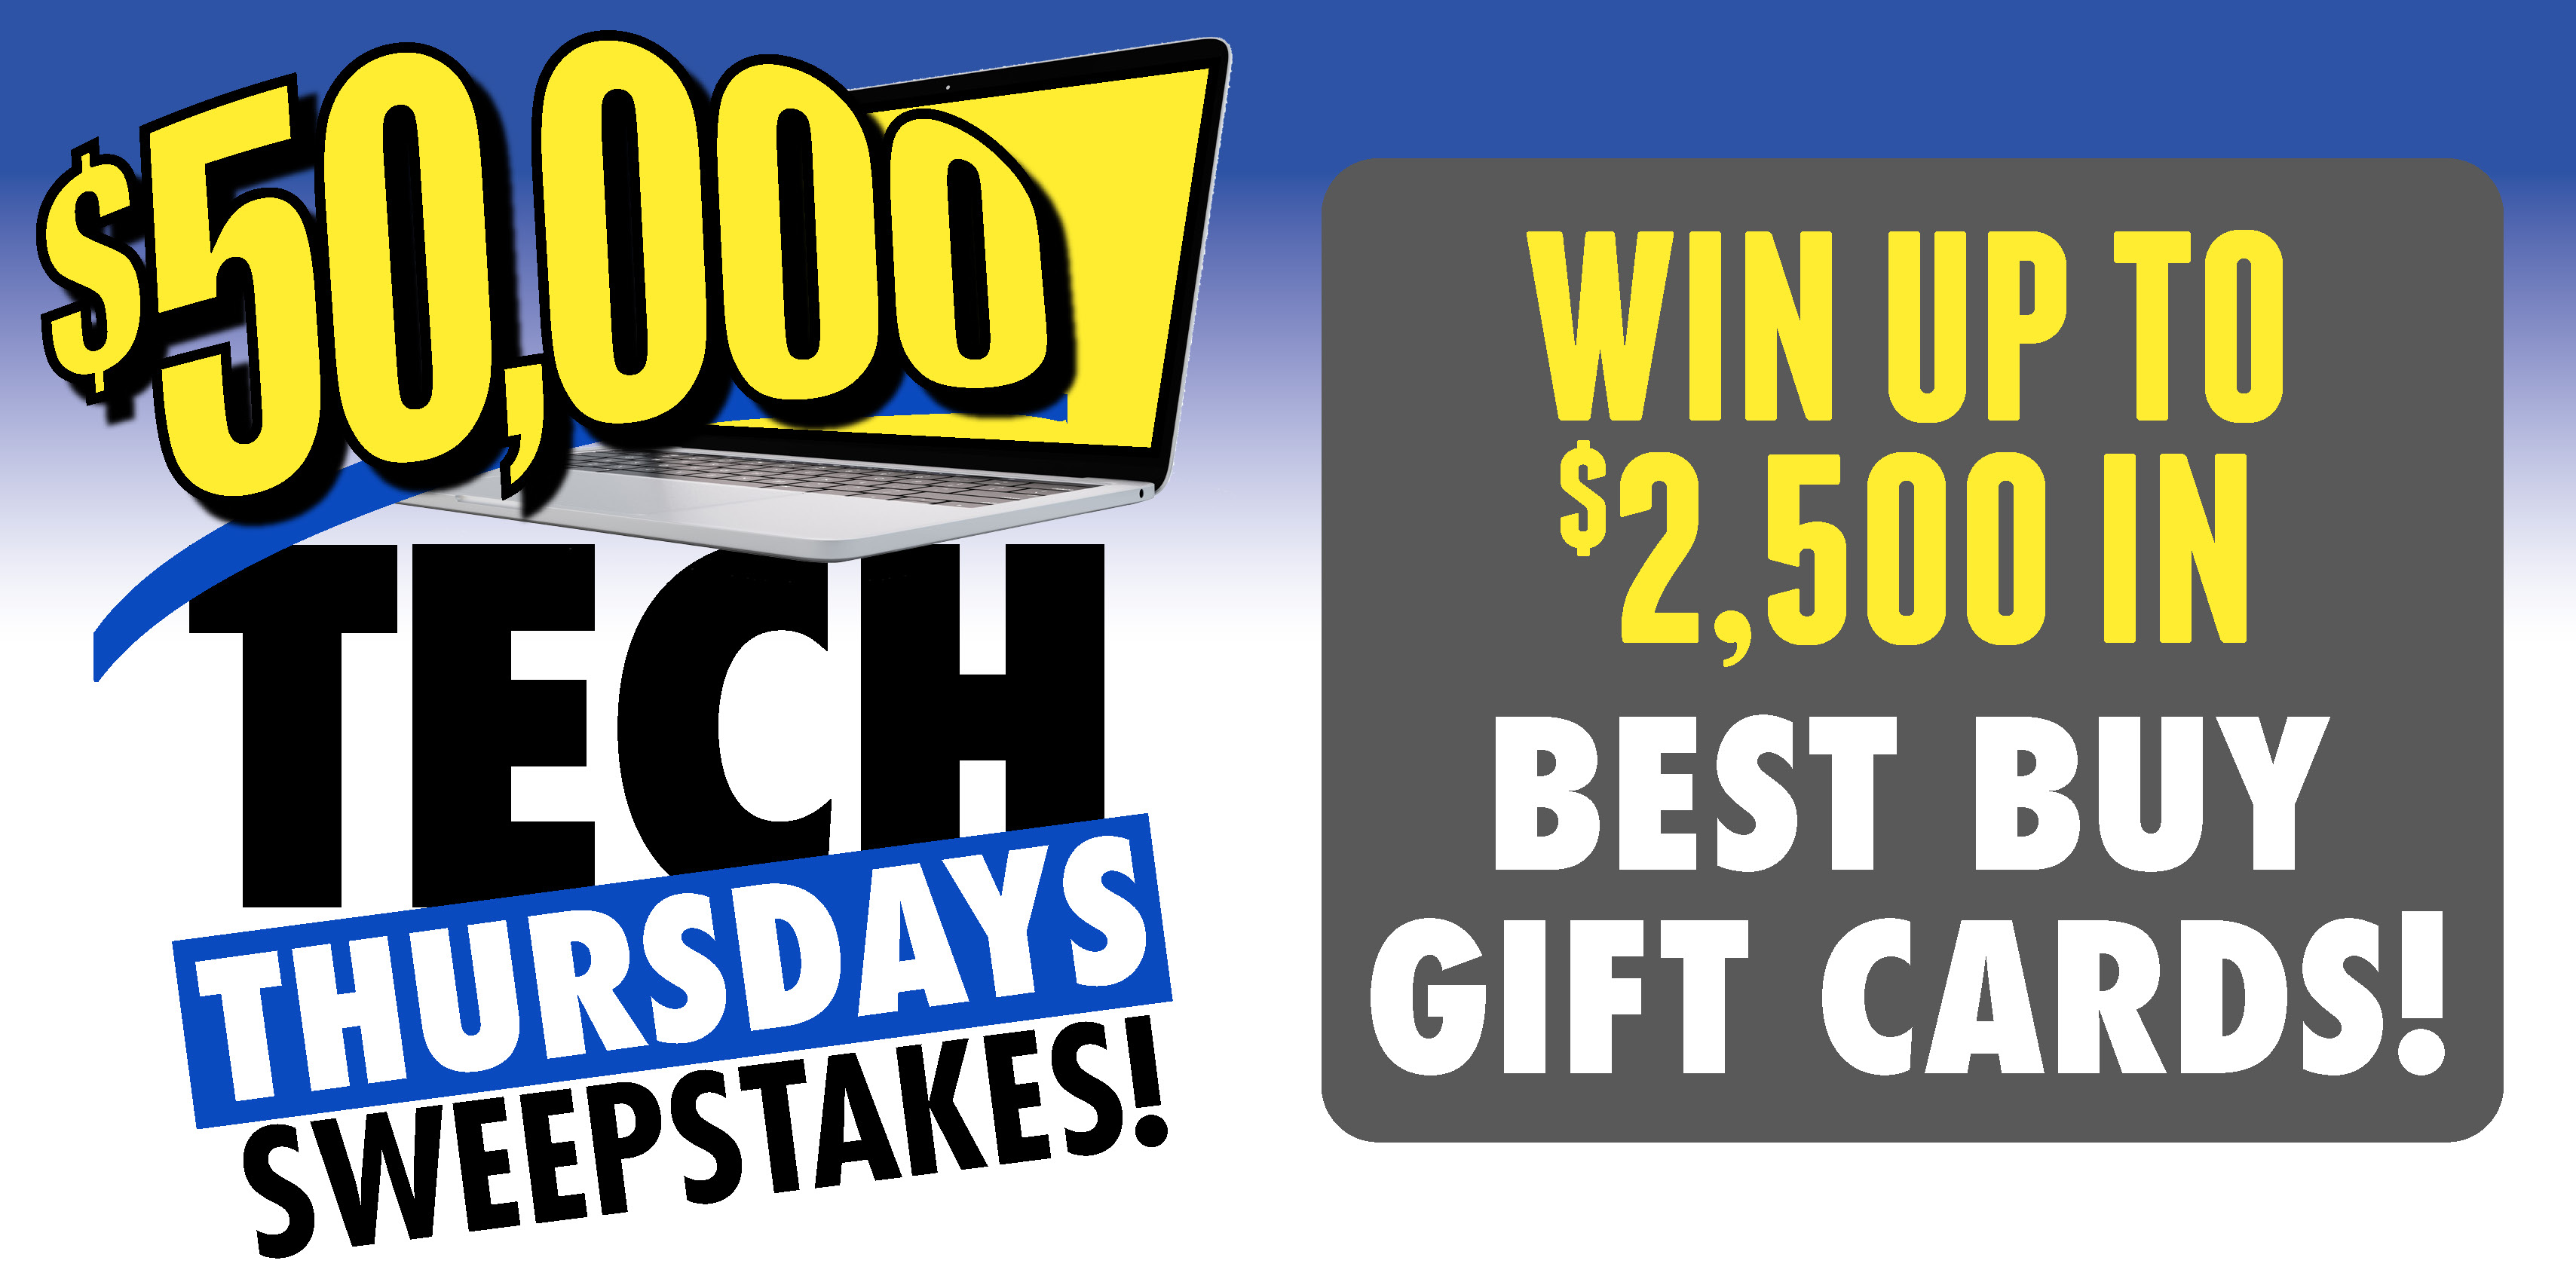 Win Up To $2,500 In Best Buy Gift Cards!